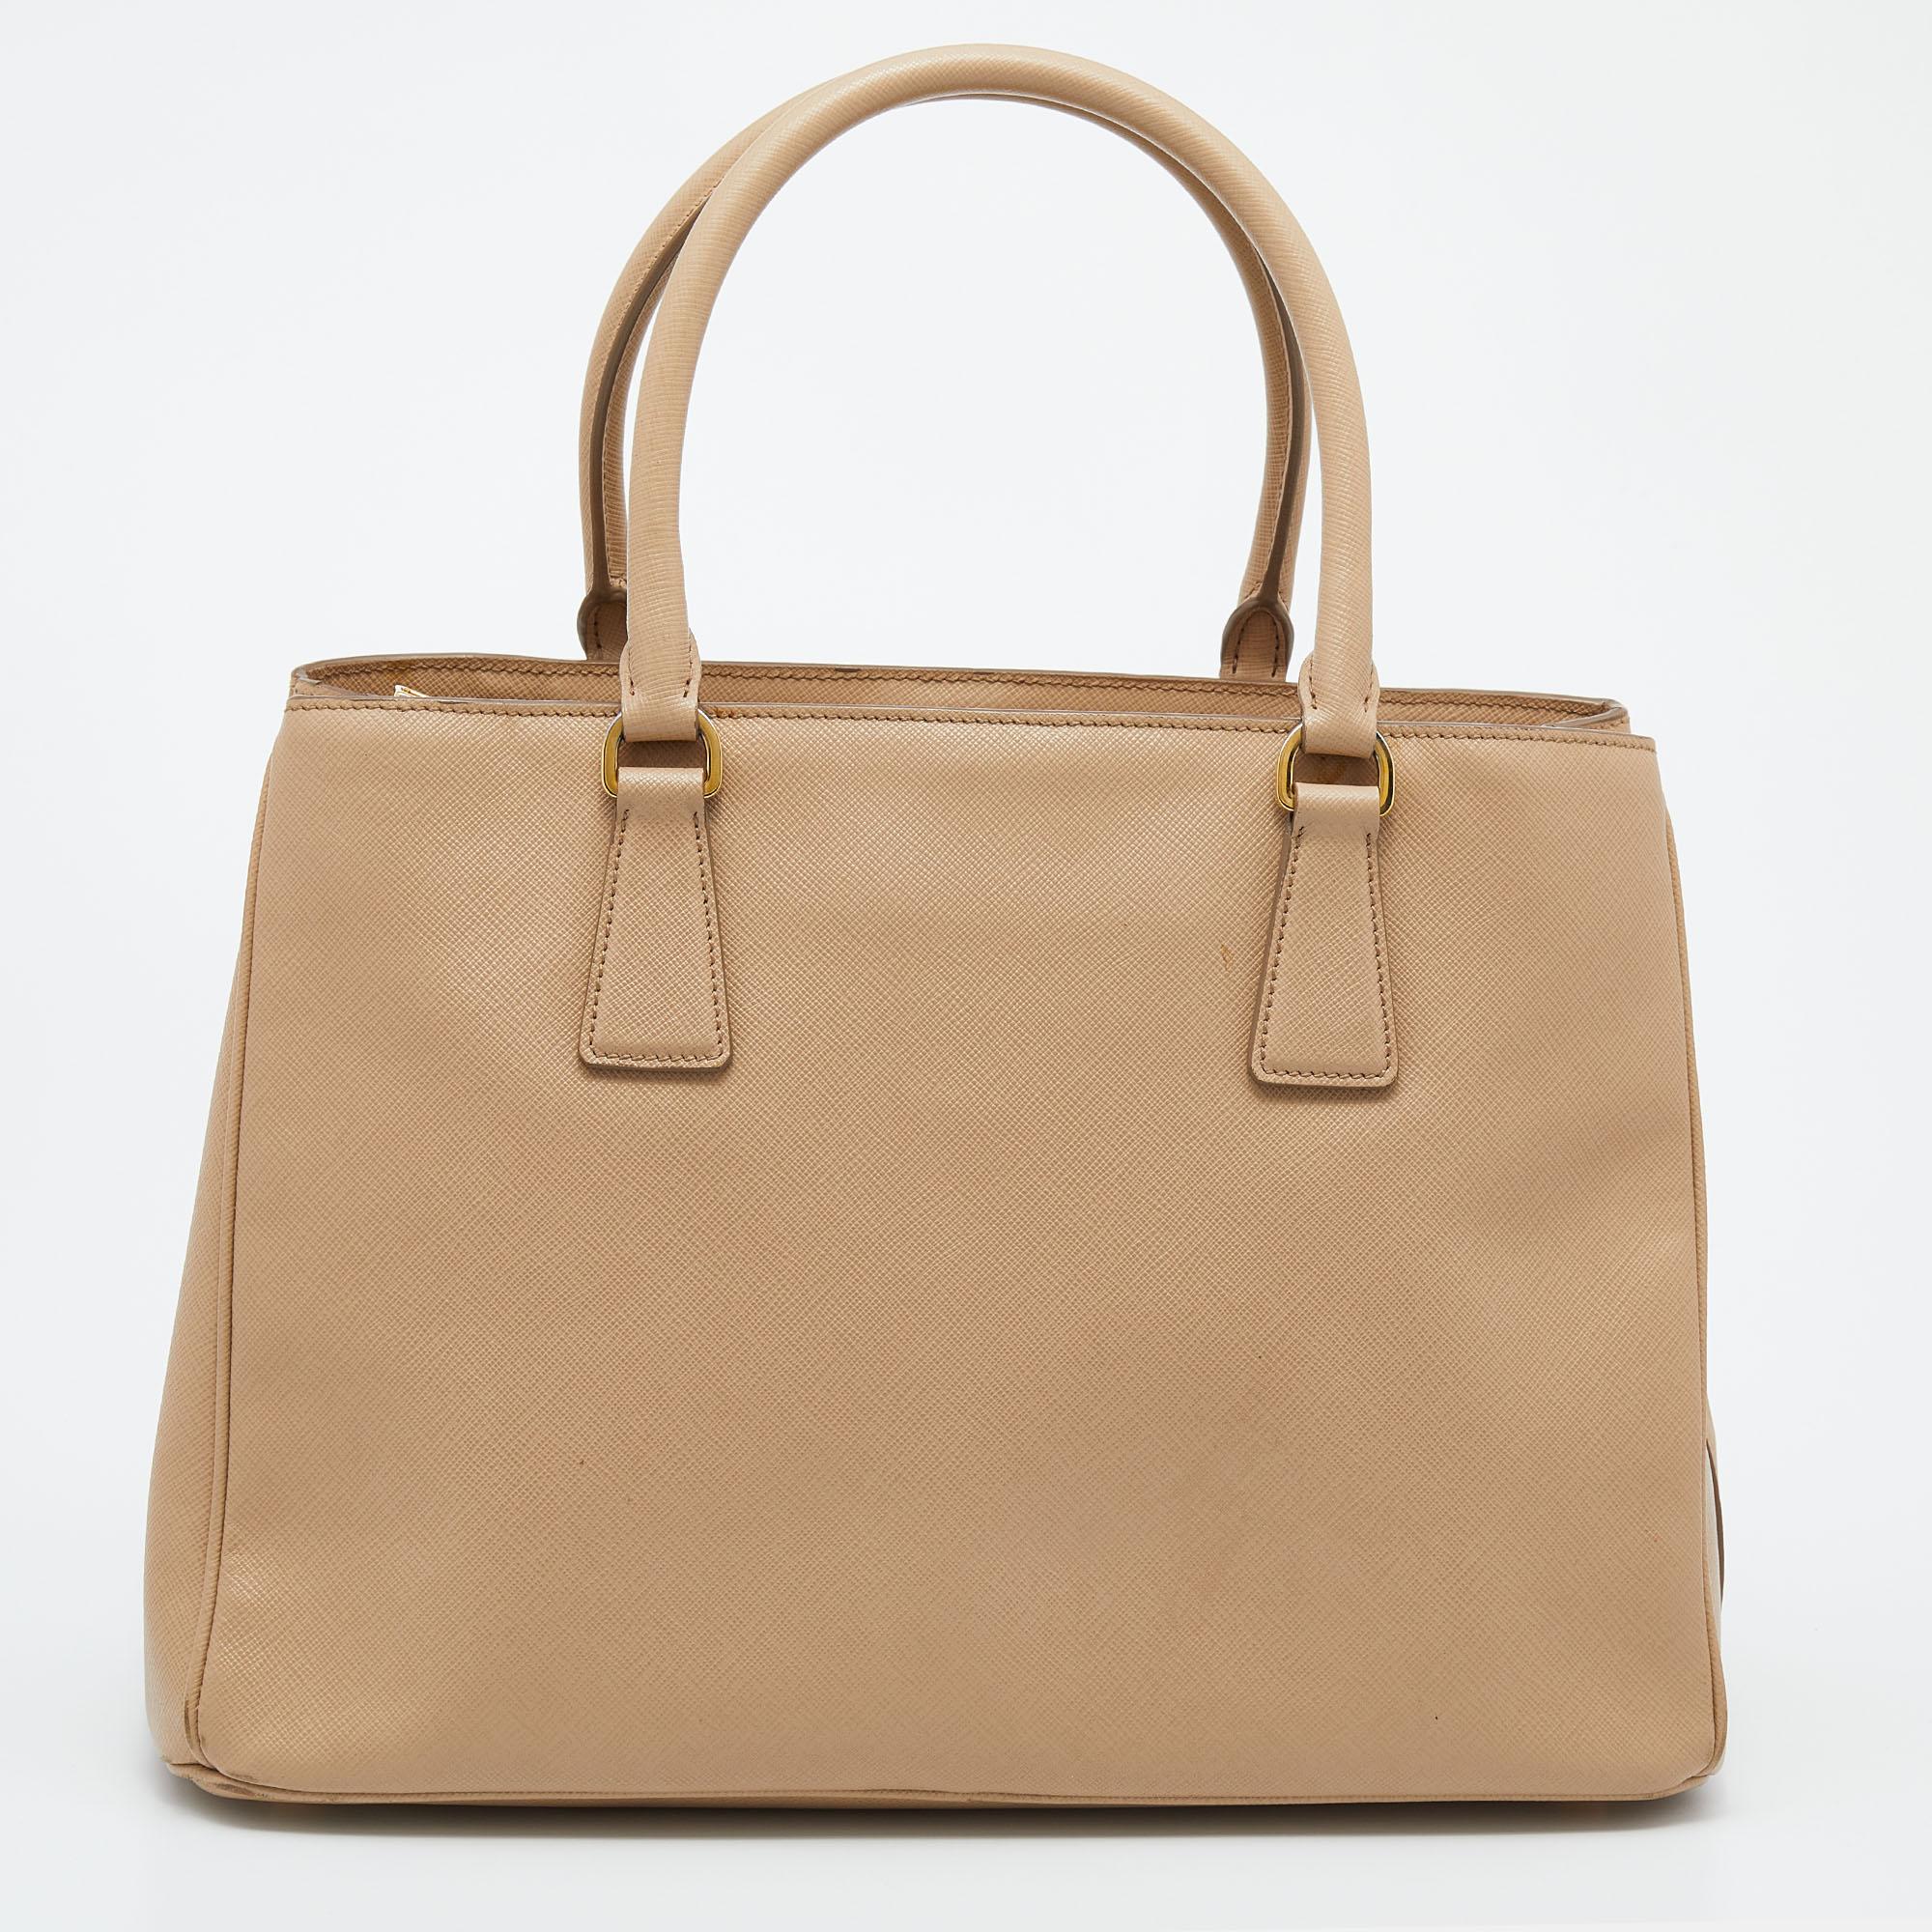 Loved for its classic appeal and functional design, Galleria is one of the most iconic bags from the house of Prada. This beauty in beige is crafted from Saffiano Lux leather and is equipped with two top handles, the triangular brand logo at the